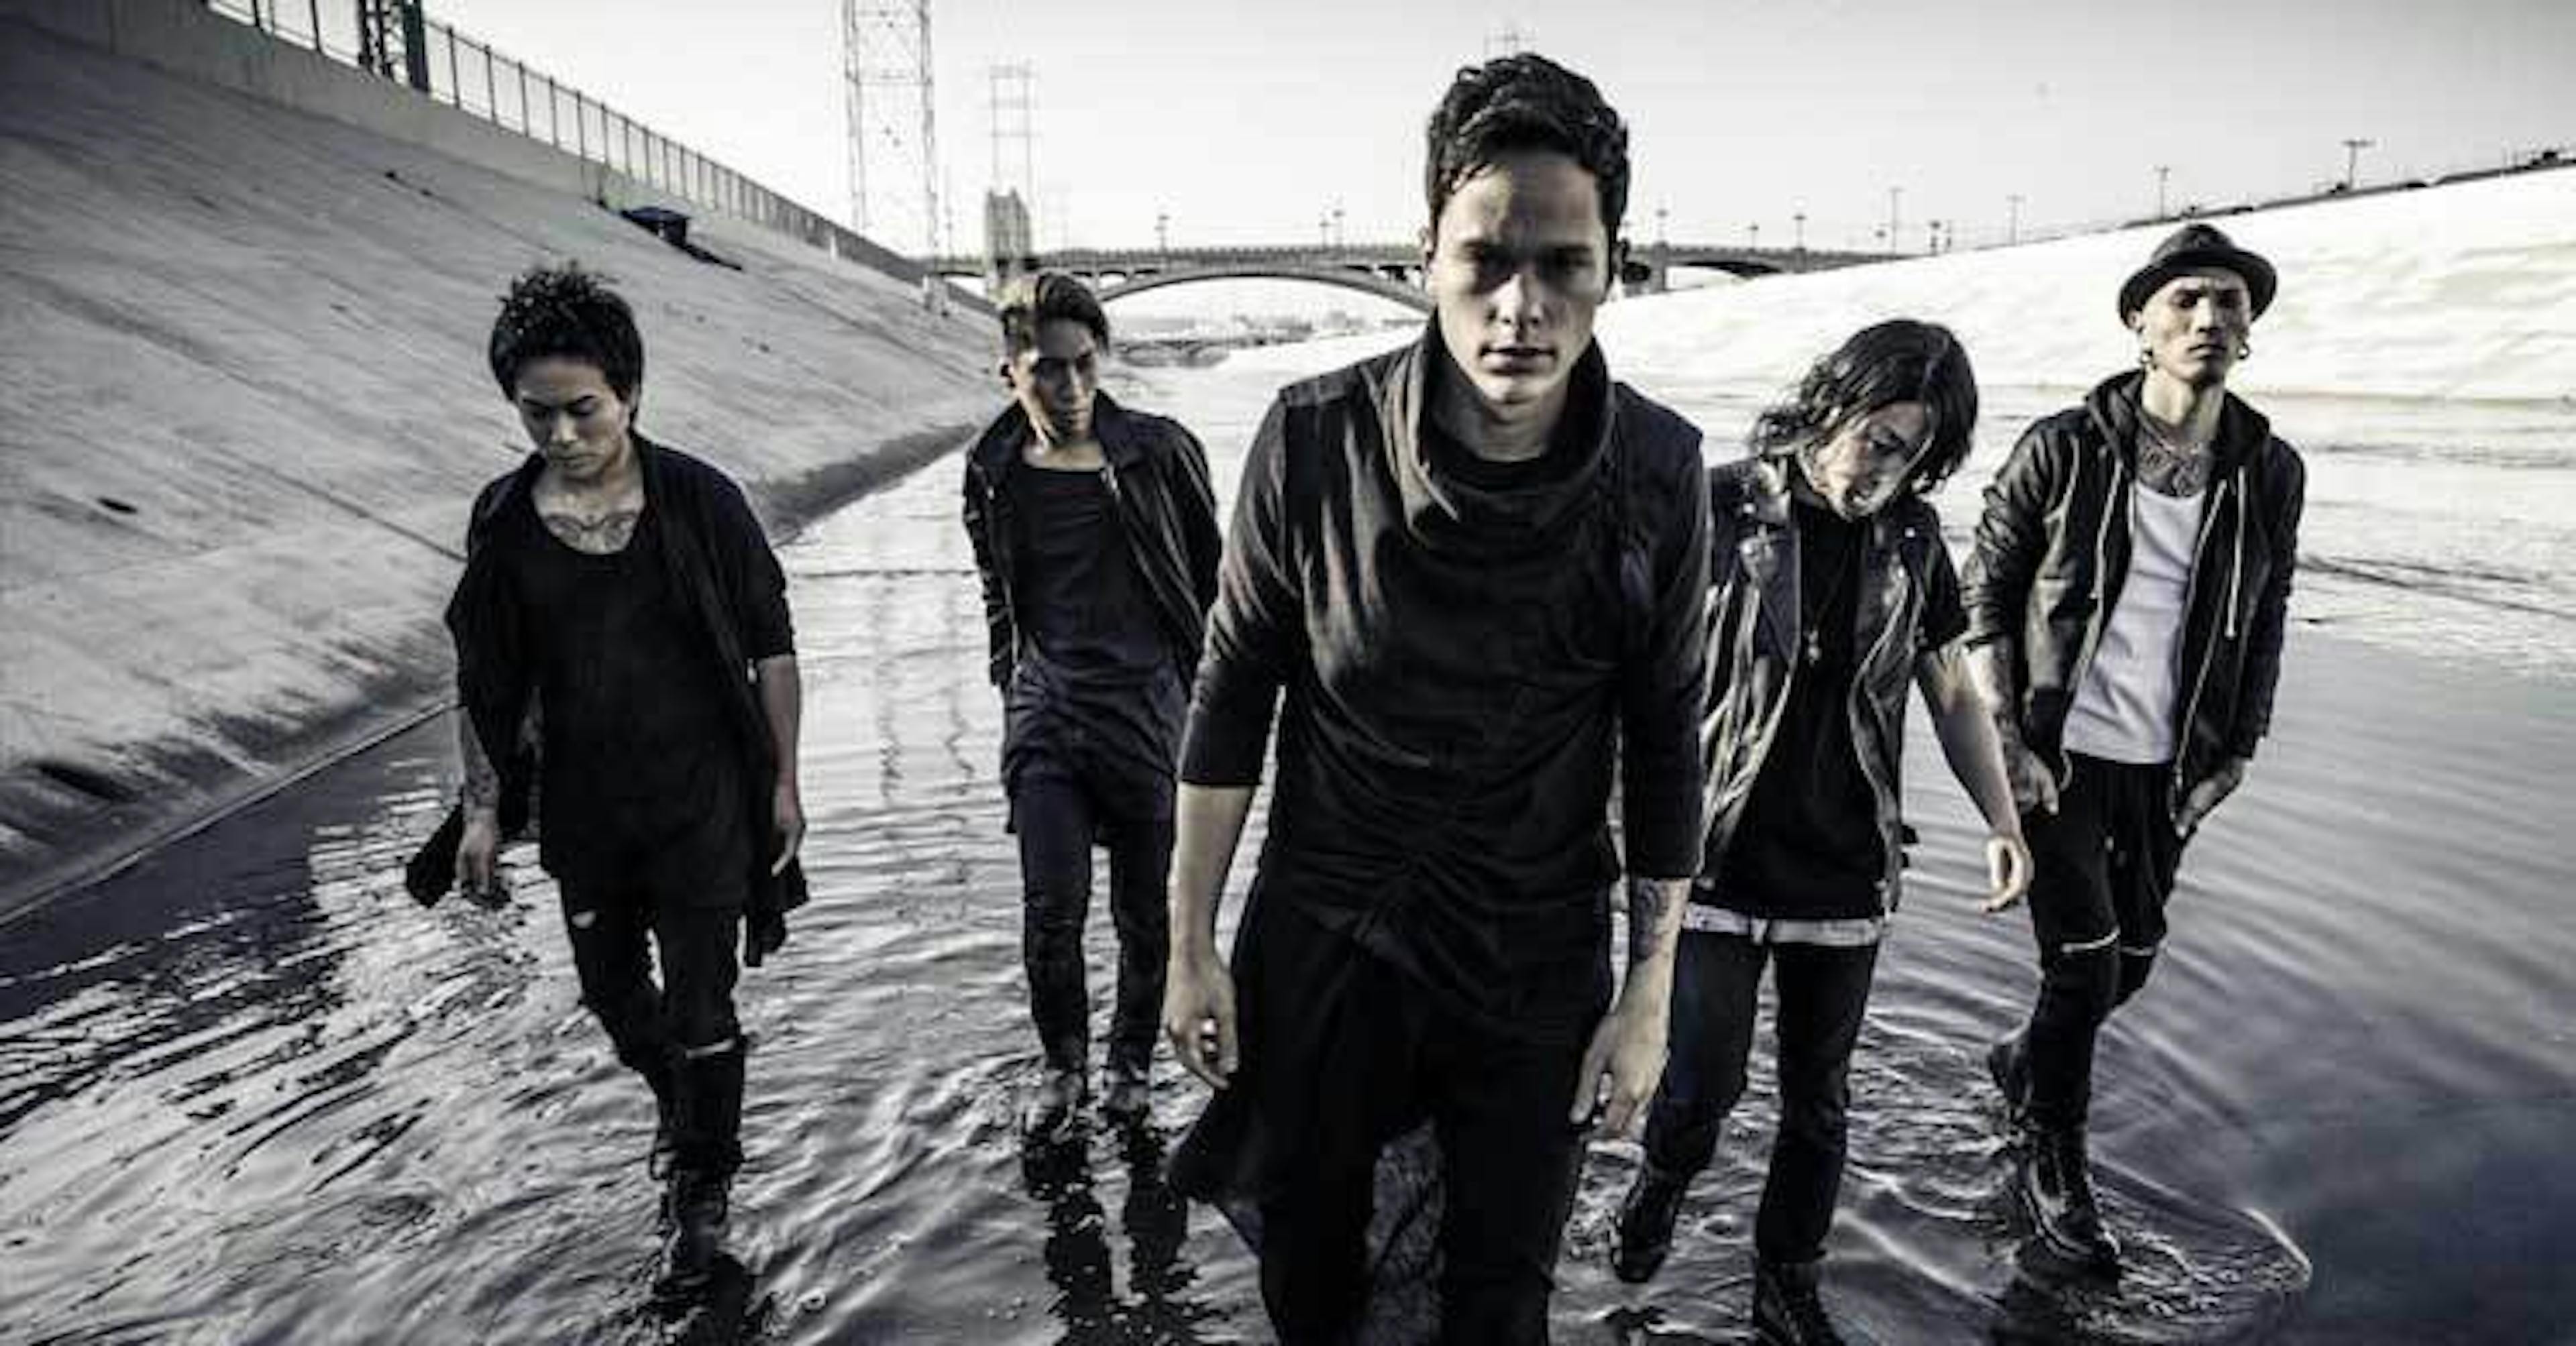 coldrain Release New Video Featuring Bullet For My Valentine + While She Sleeps